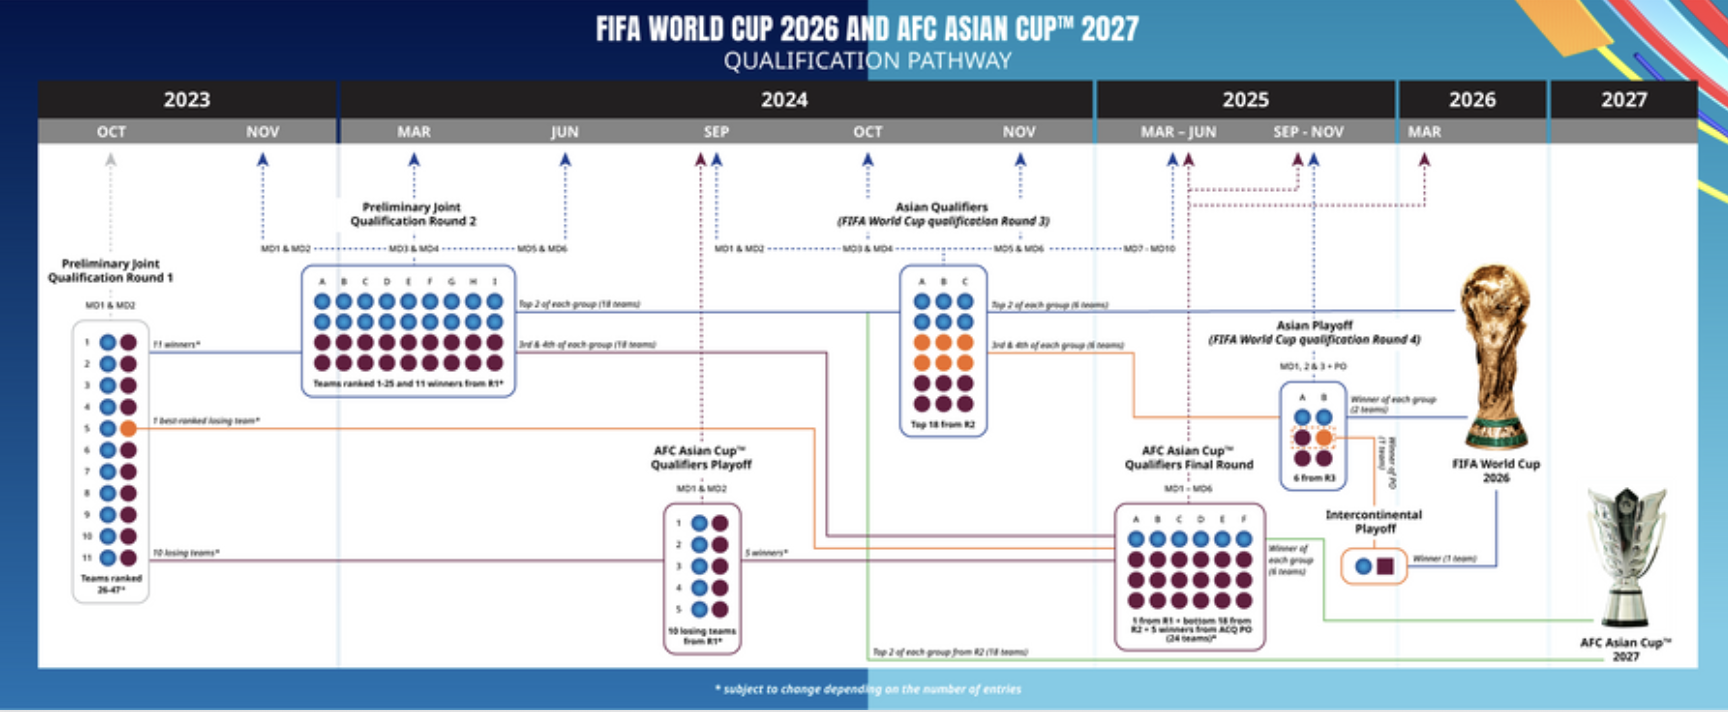 AFC outlines qualification pathway for World Cup 2026 and Asian Cup